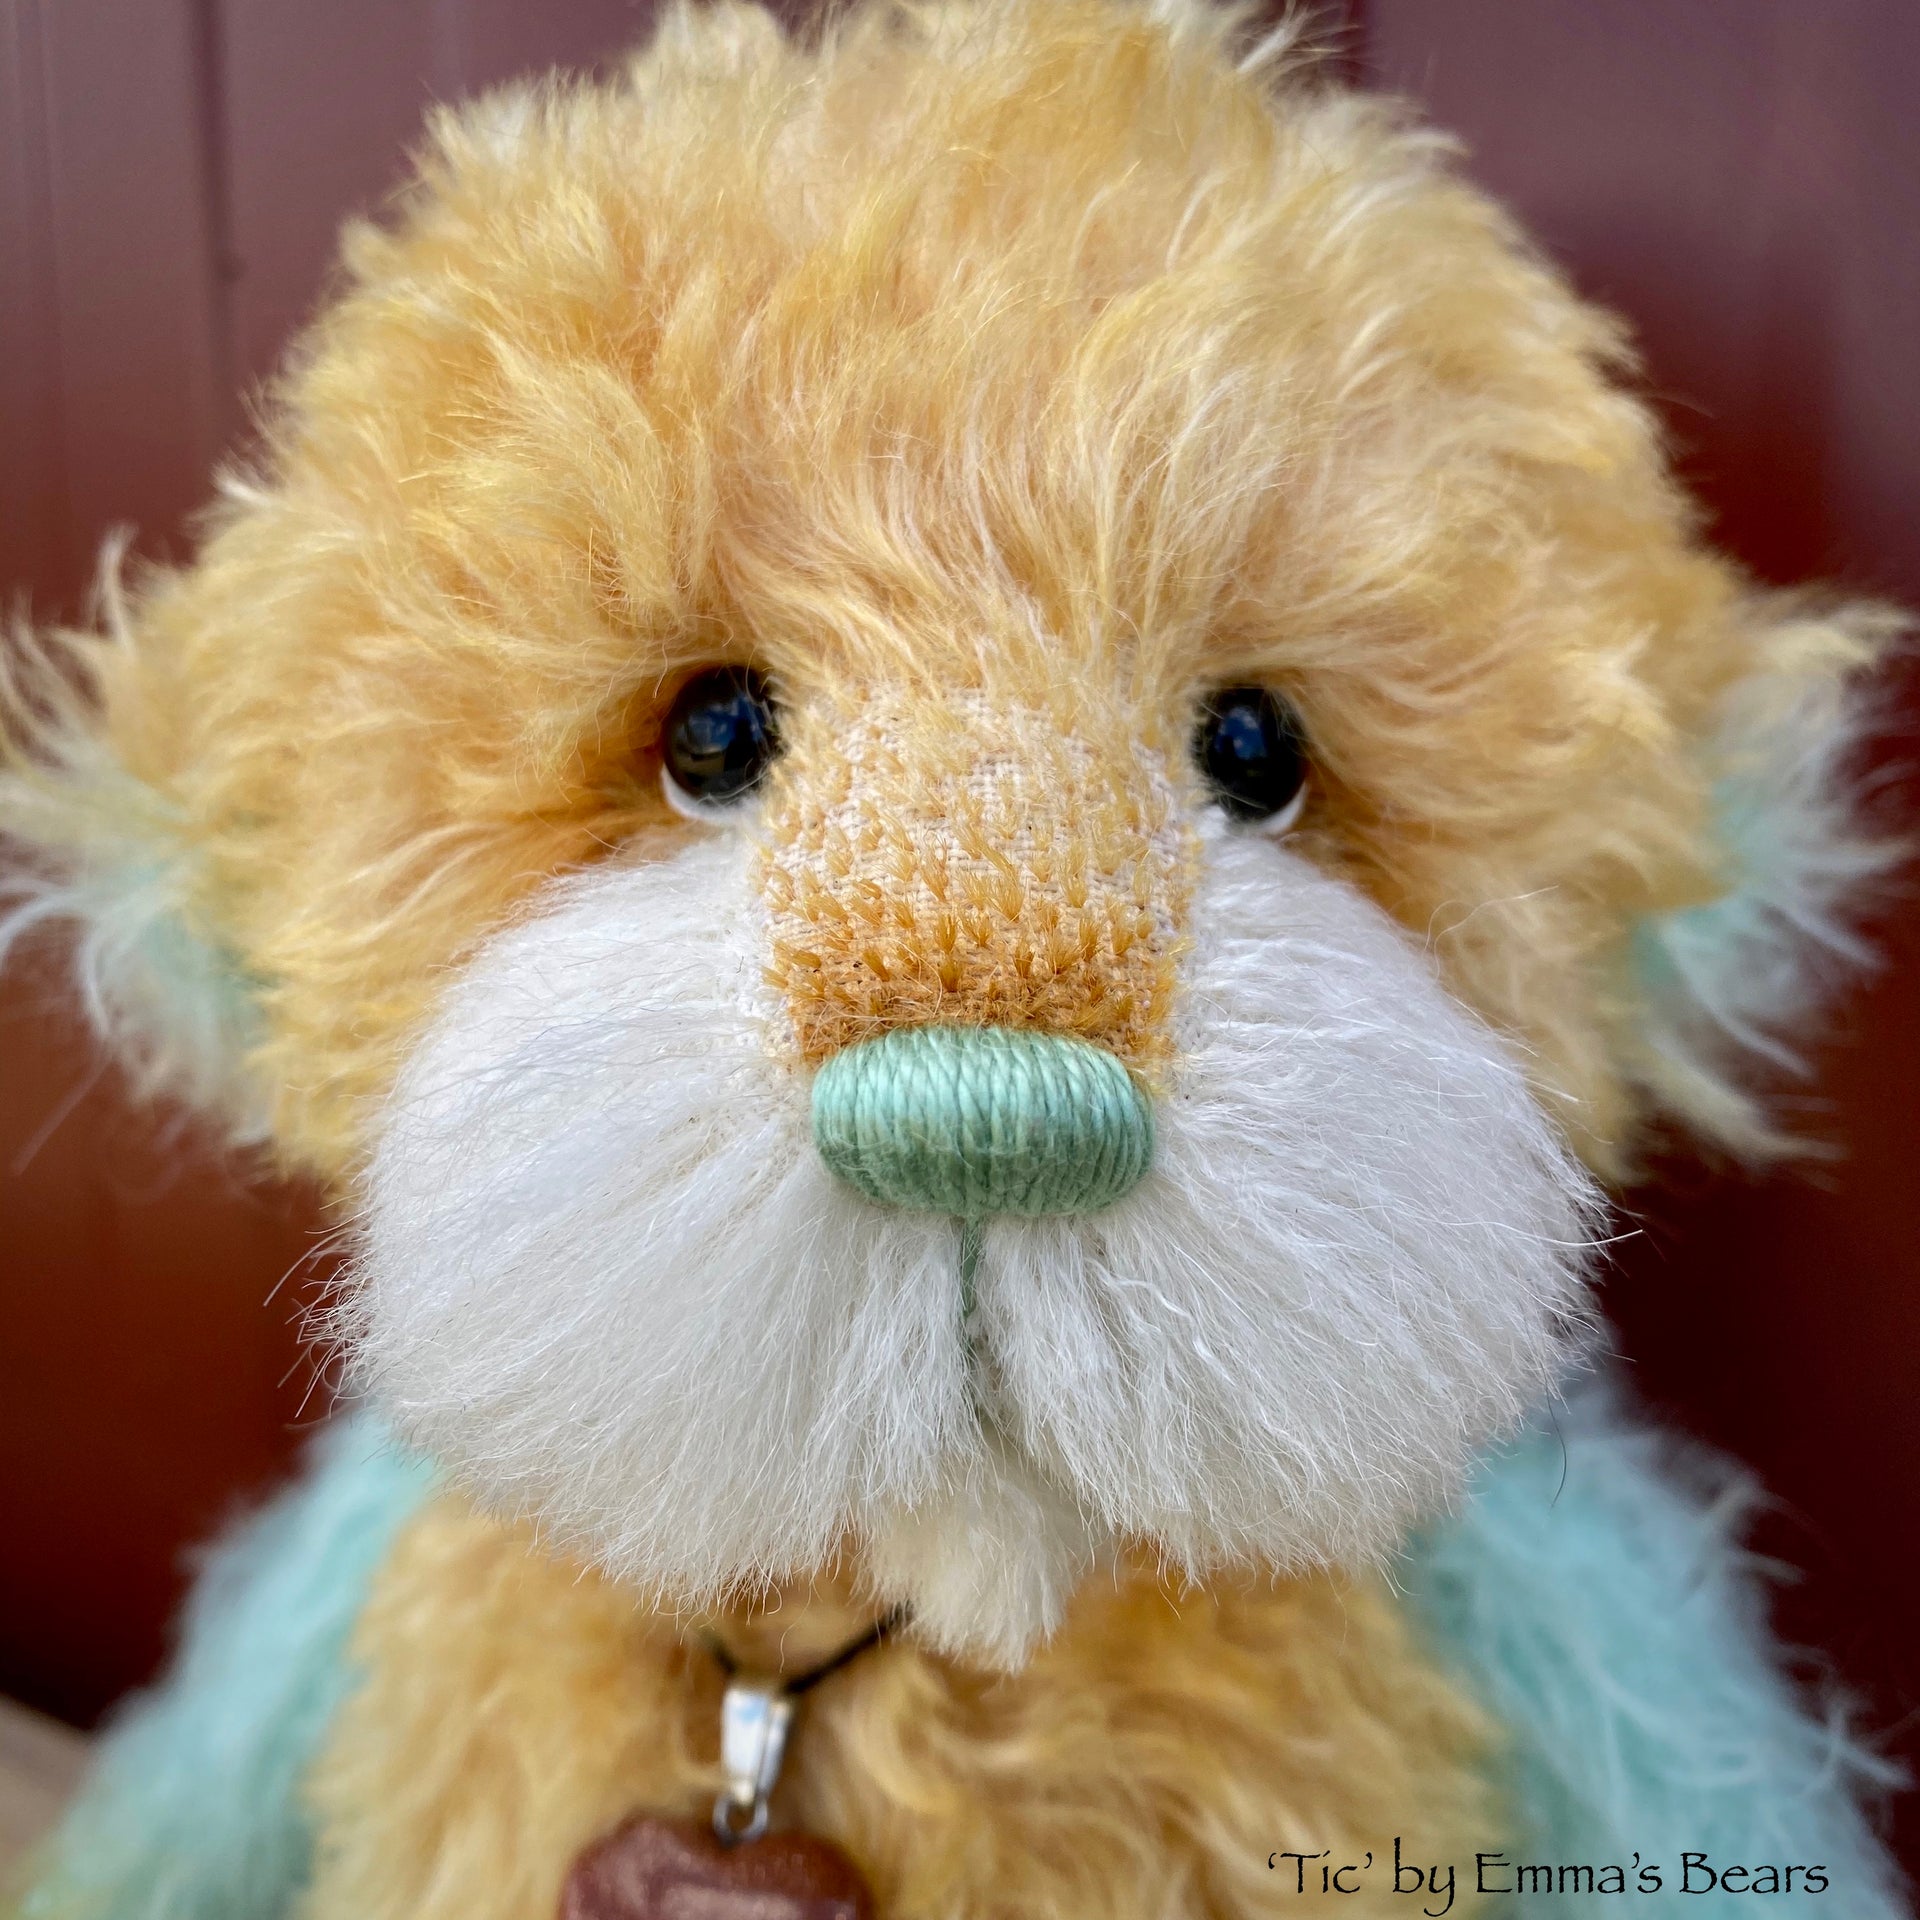 Tic - 8" Hand-Dyed Mohair and Alpaca Artist Bear by Emma's Bears - OOAK in a Limited Series